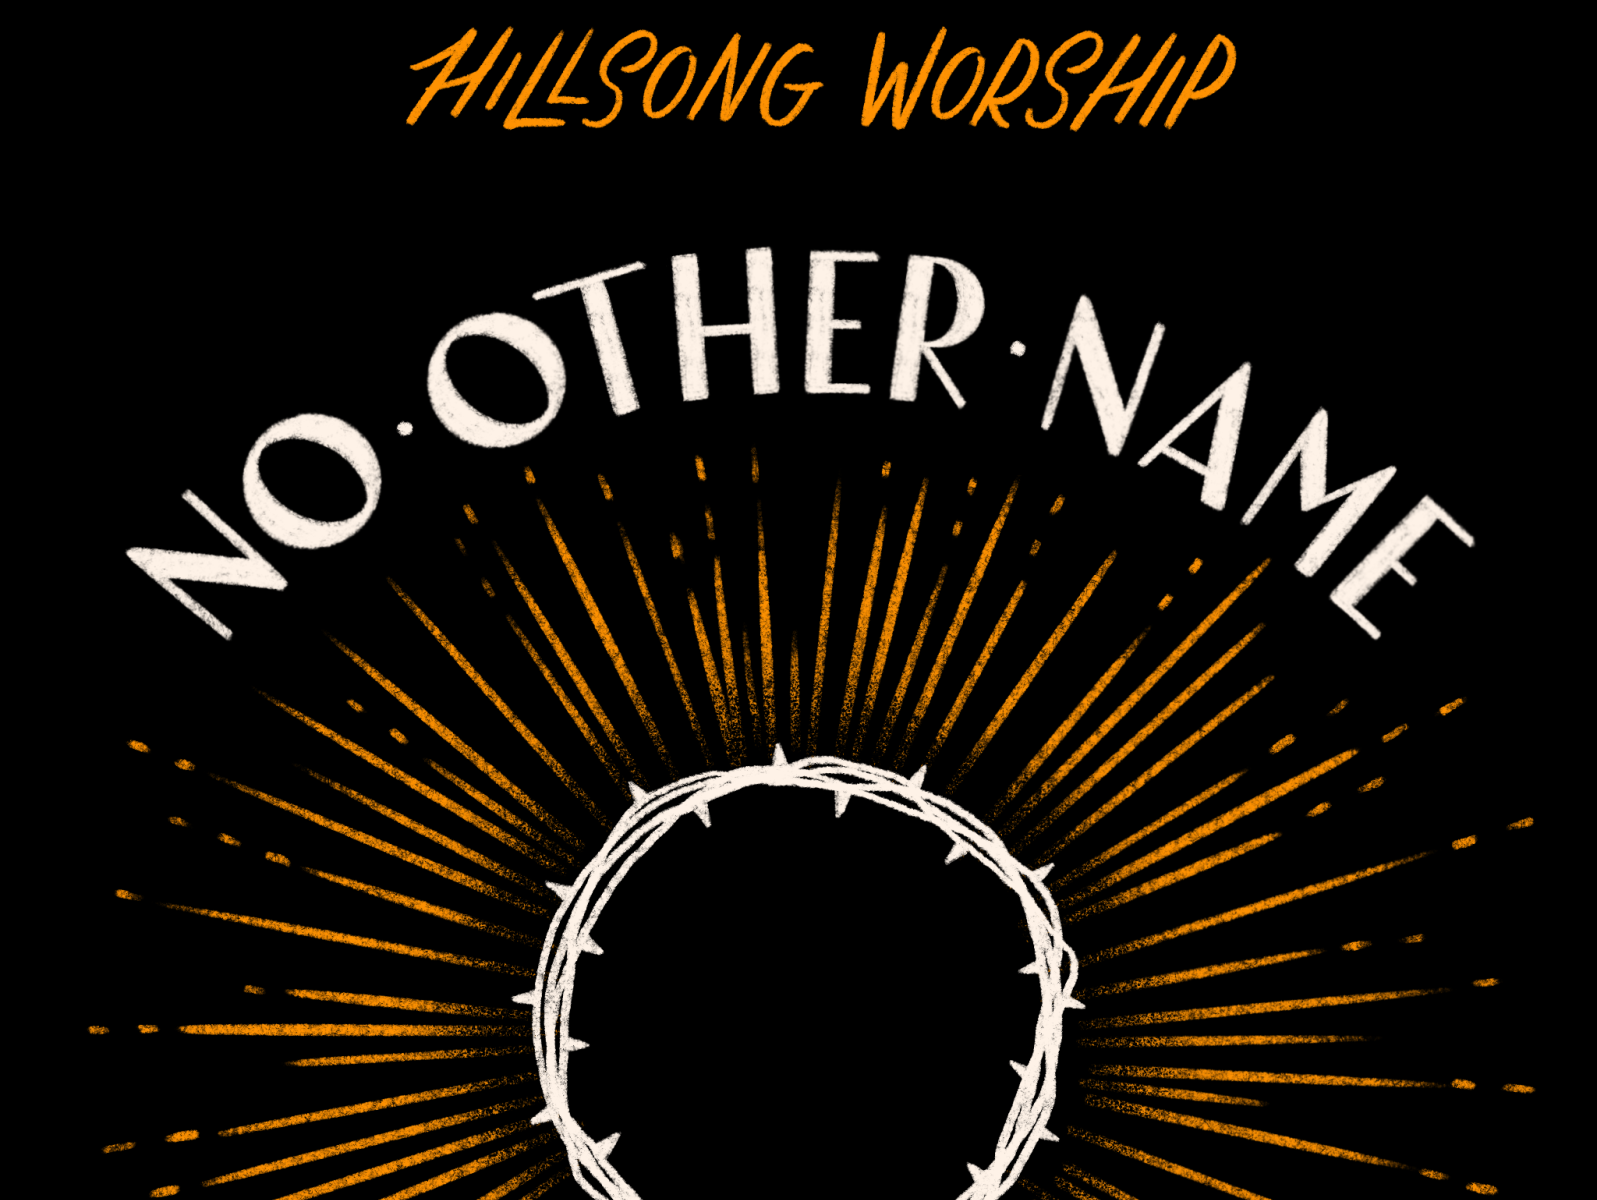 Hillsong No Other Name By Andrea Rochelle On Dribbble